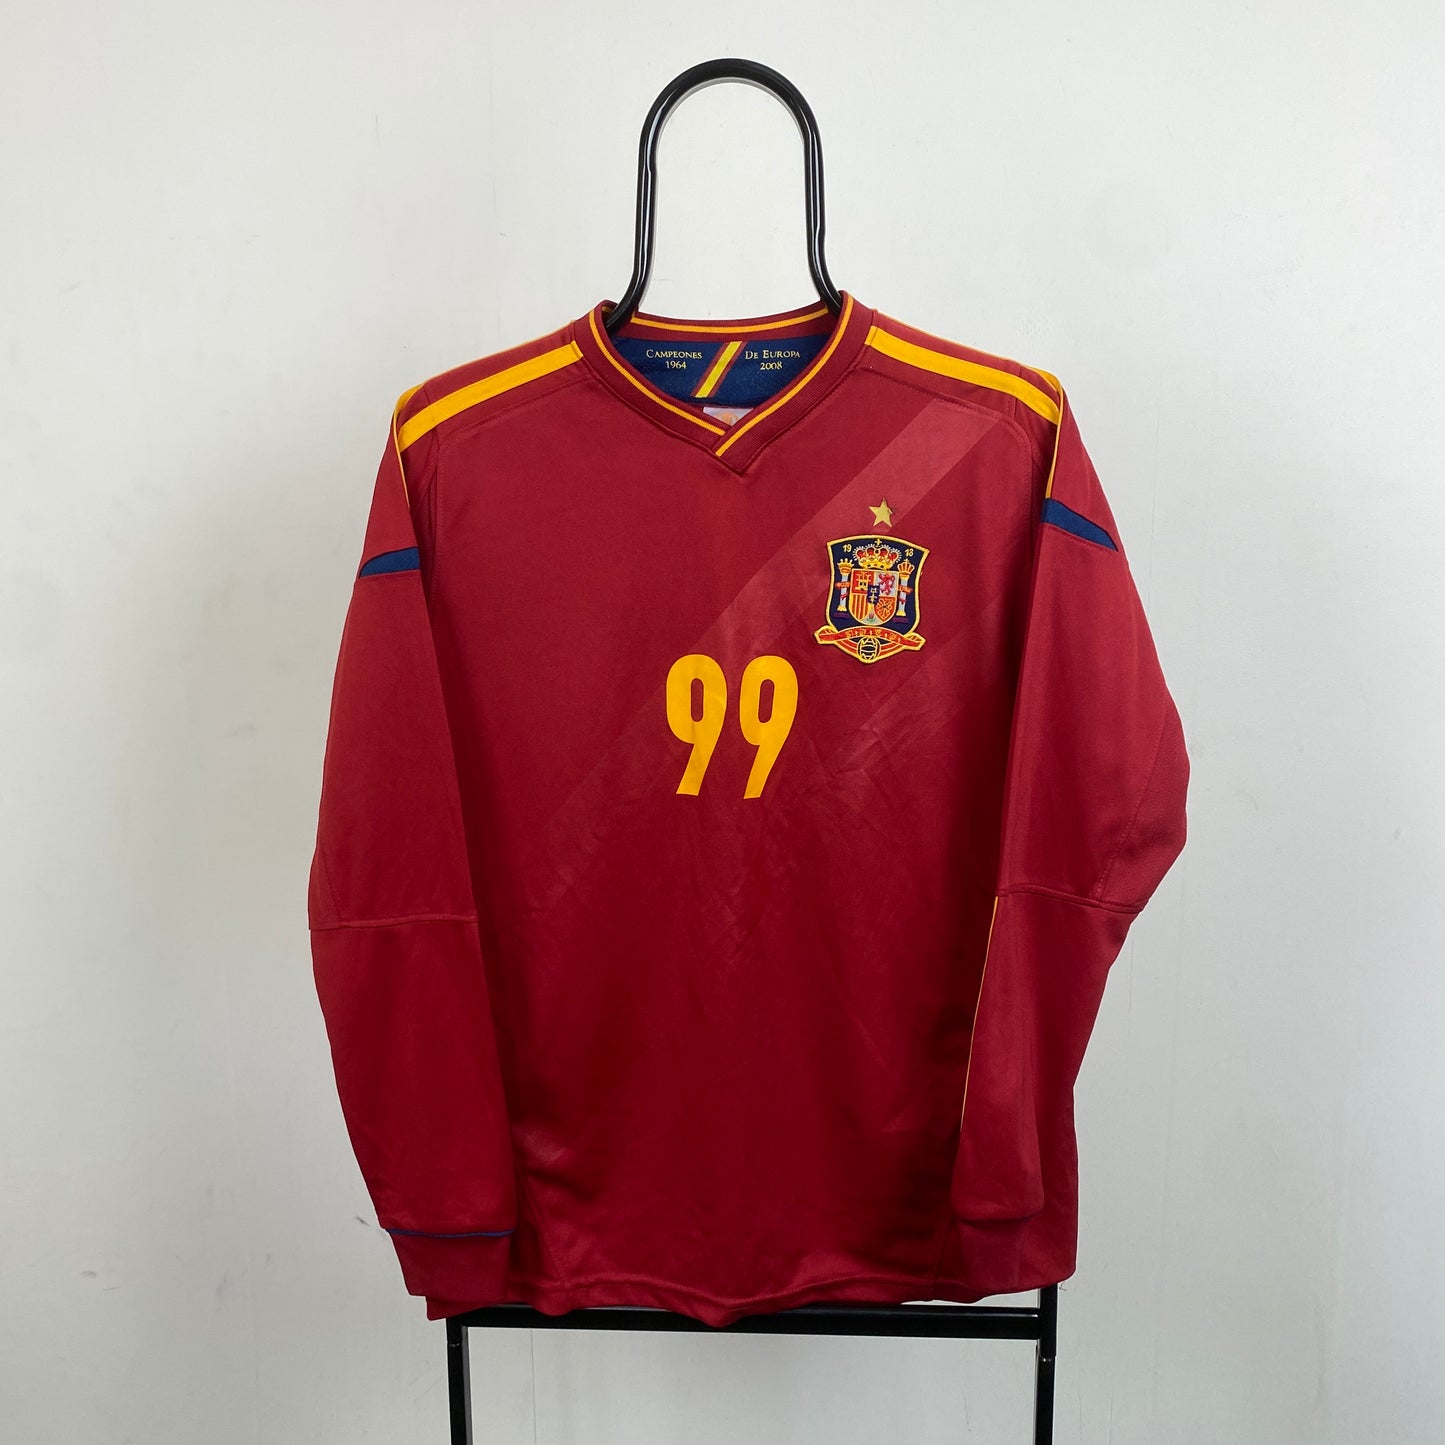 Retro Spain Fan Style Football Shirt T-Shirt Red Large